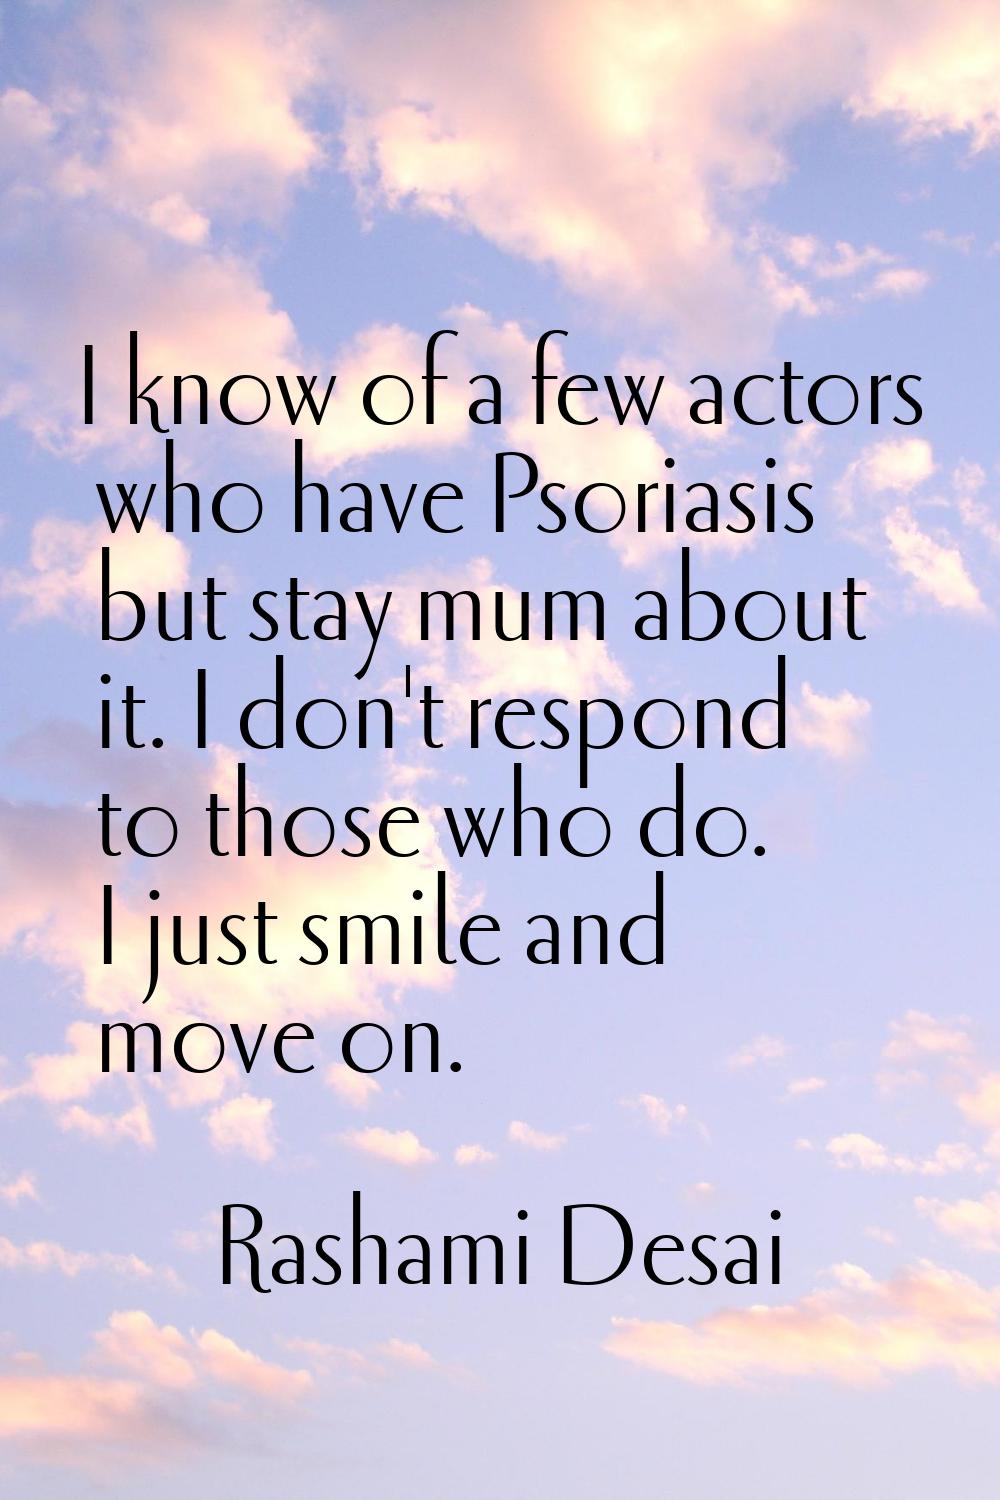 I know of a few actors who have Psoriasis but stay mum about it. I don't respond to those who do. I